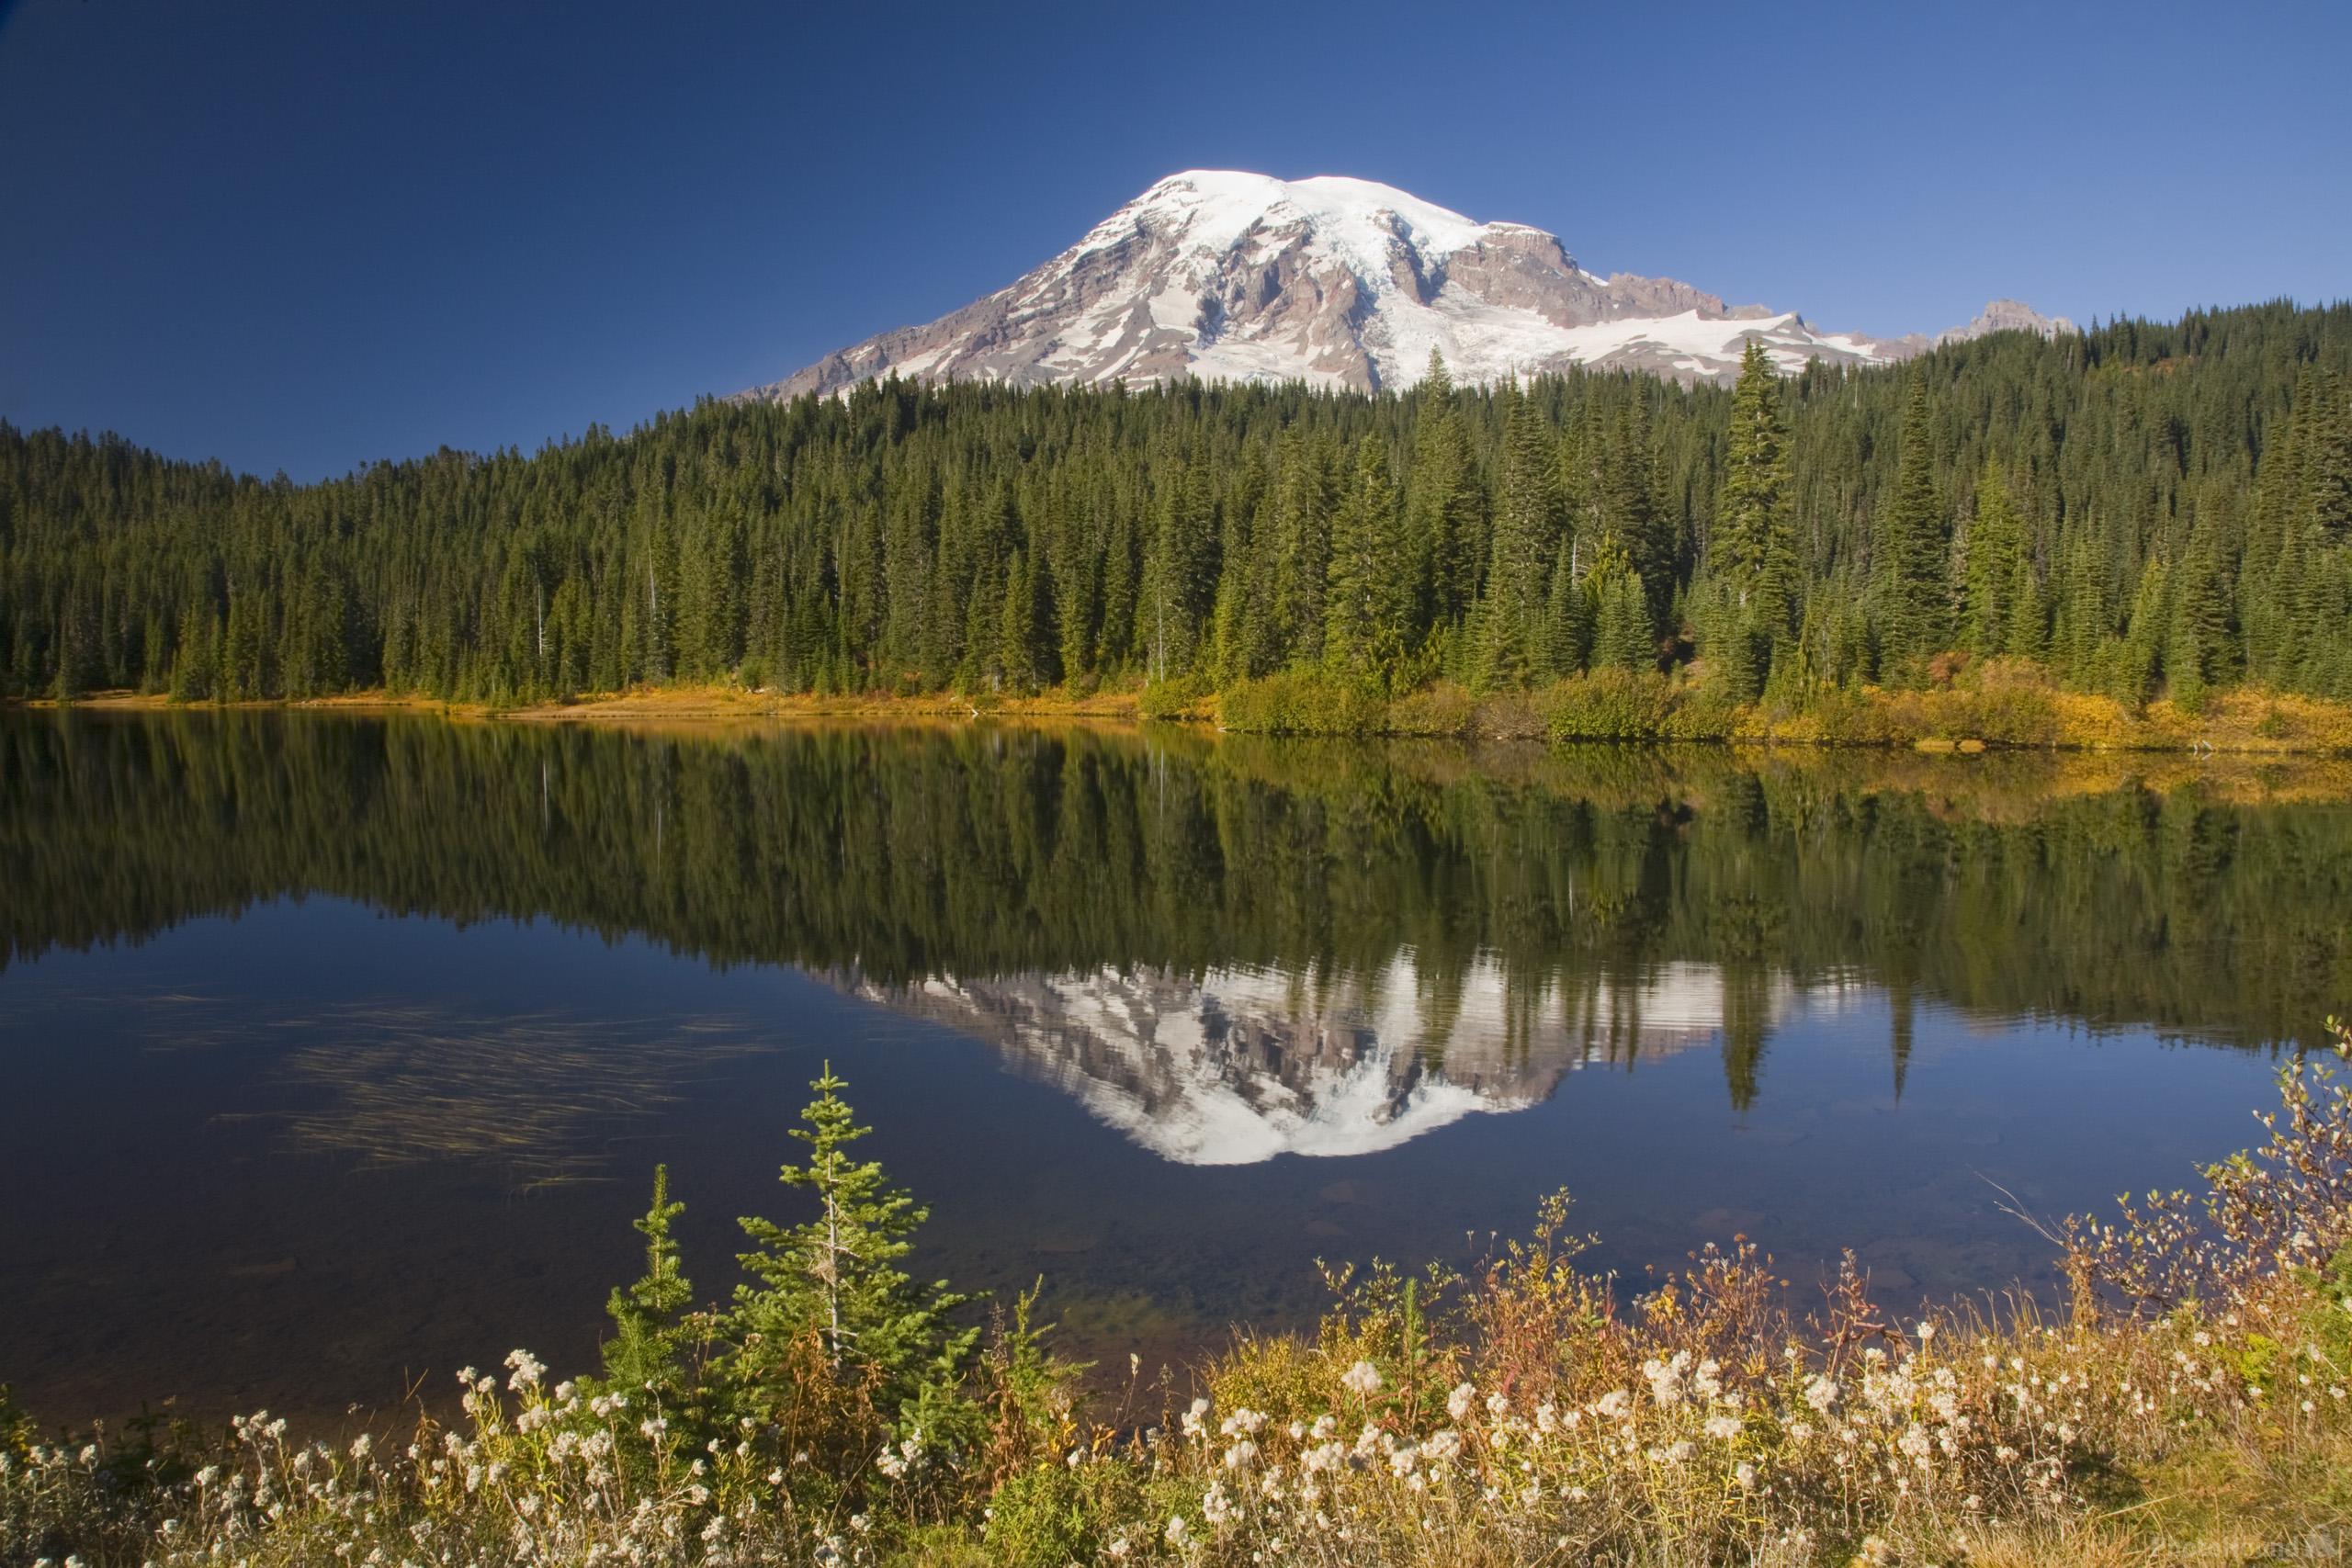 Image of Reflection Lakes, Mount Rainier National Park by T. Kirkendall and V. Spring